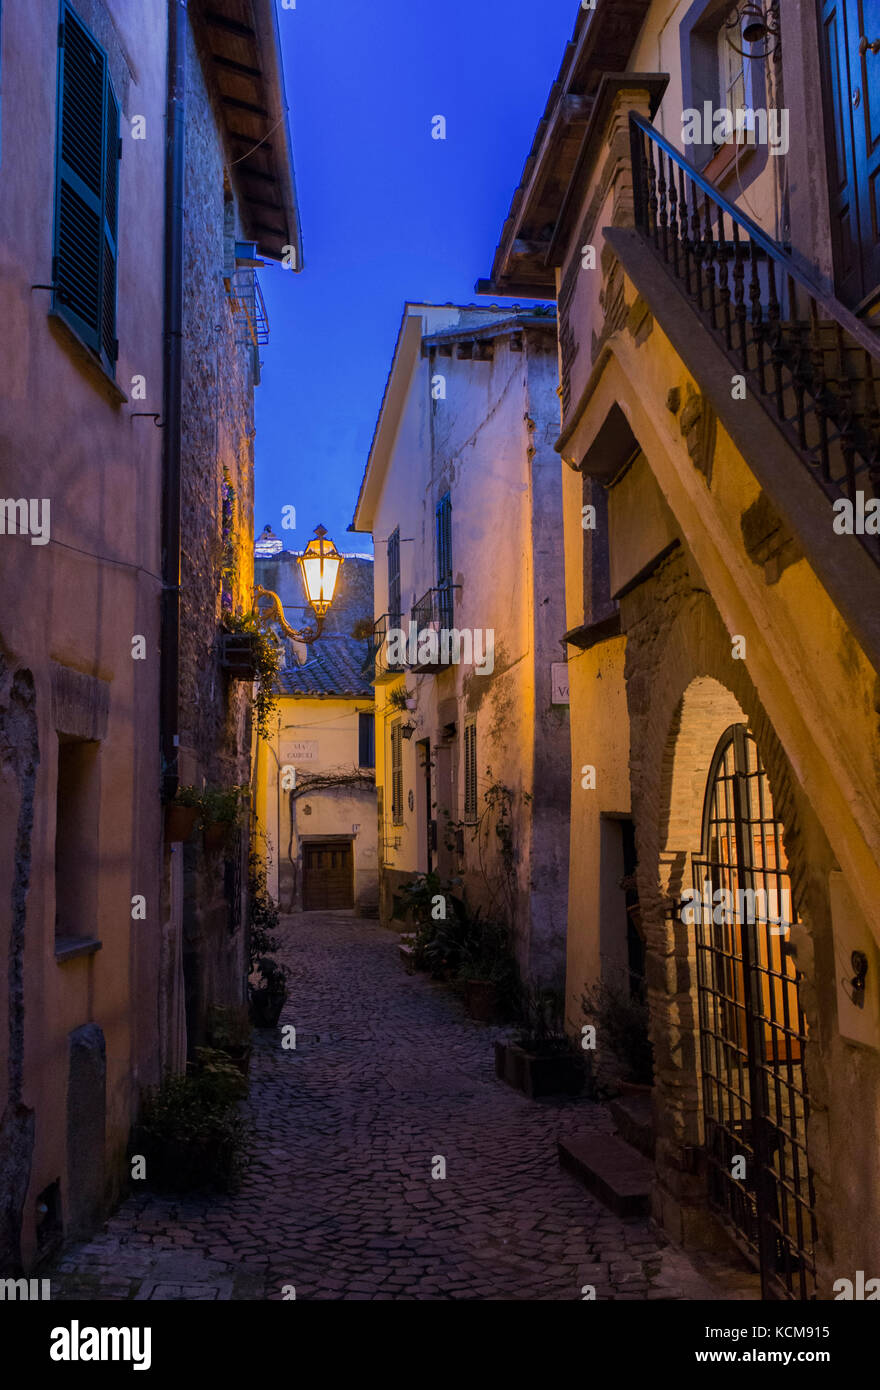 A typical street of little town of Trevignano Romano, on Bracciano lake, near Rome, Italy at the dusk, nicely illuminated by lamps Stock Photo